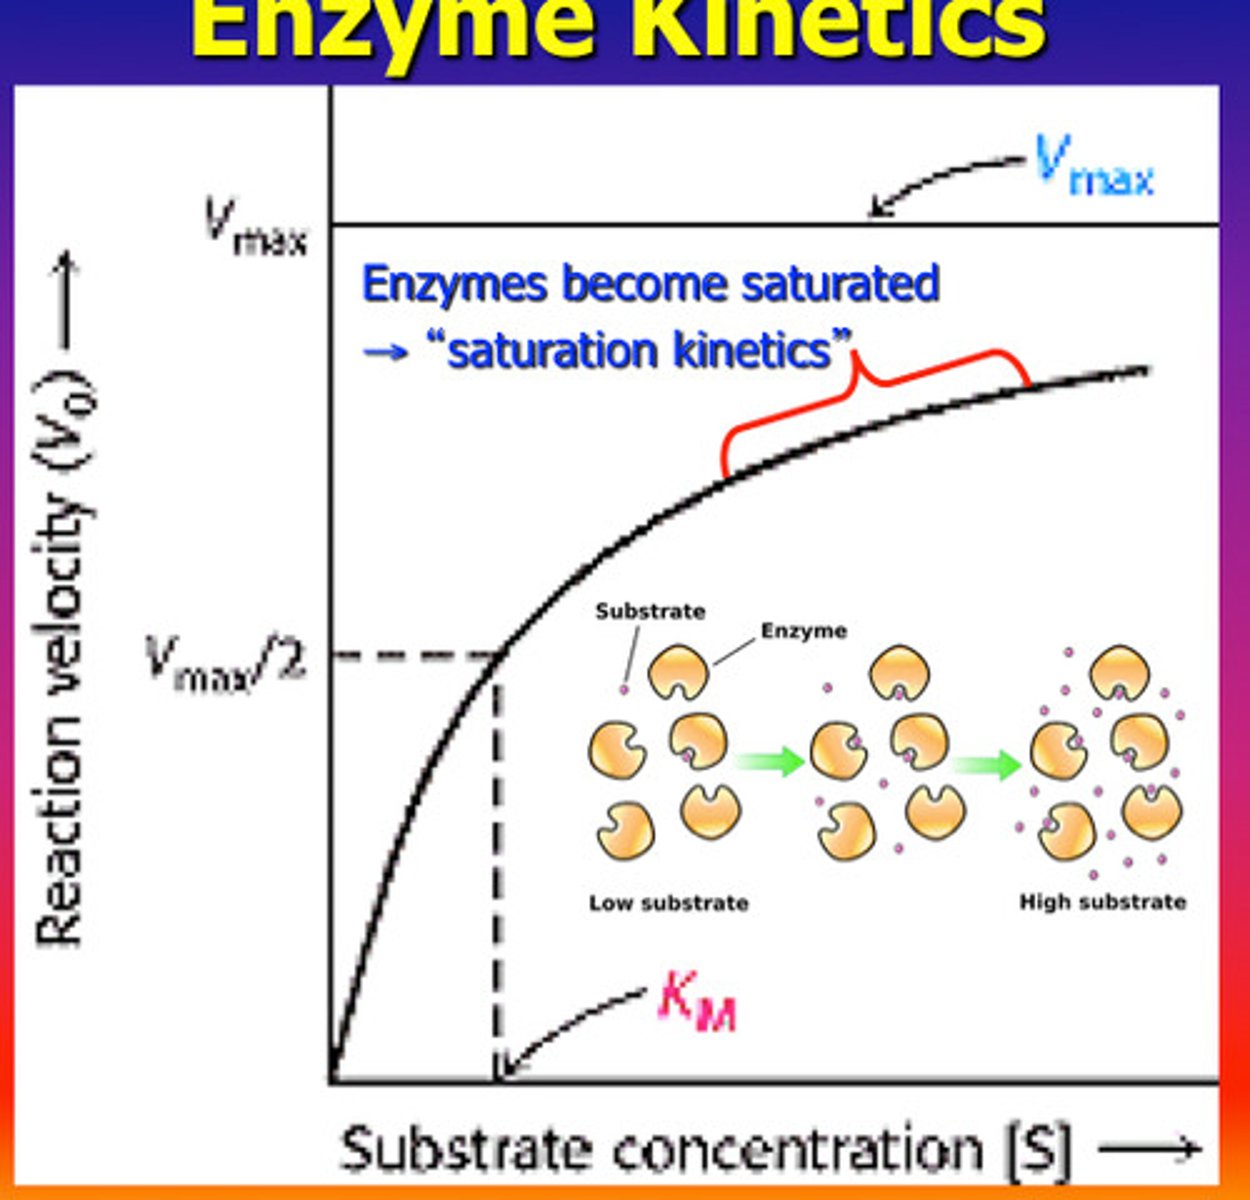 <p>Describes an enzyme's maximum activity when every active site is being used.</p>